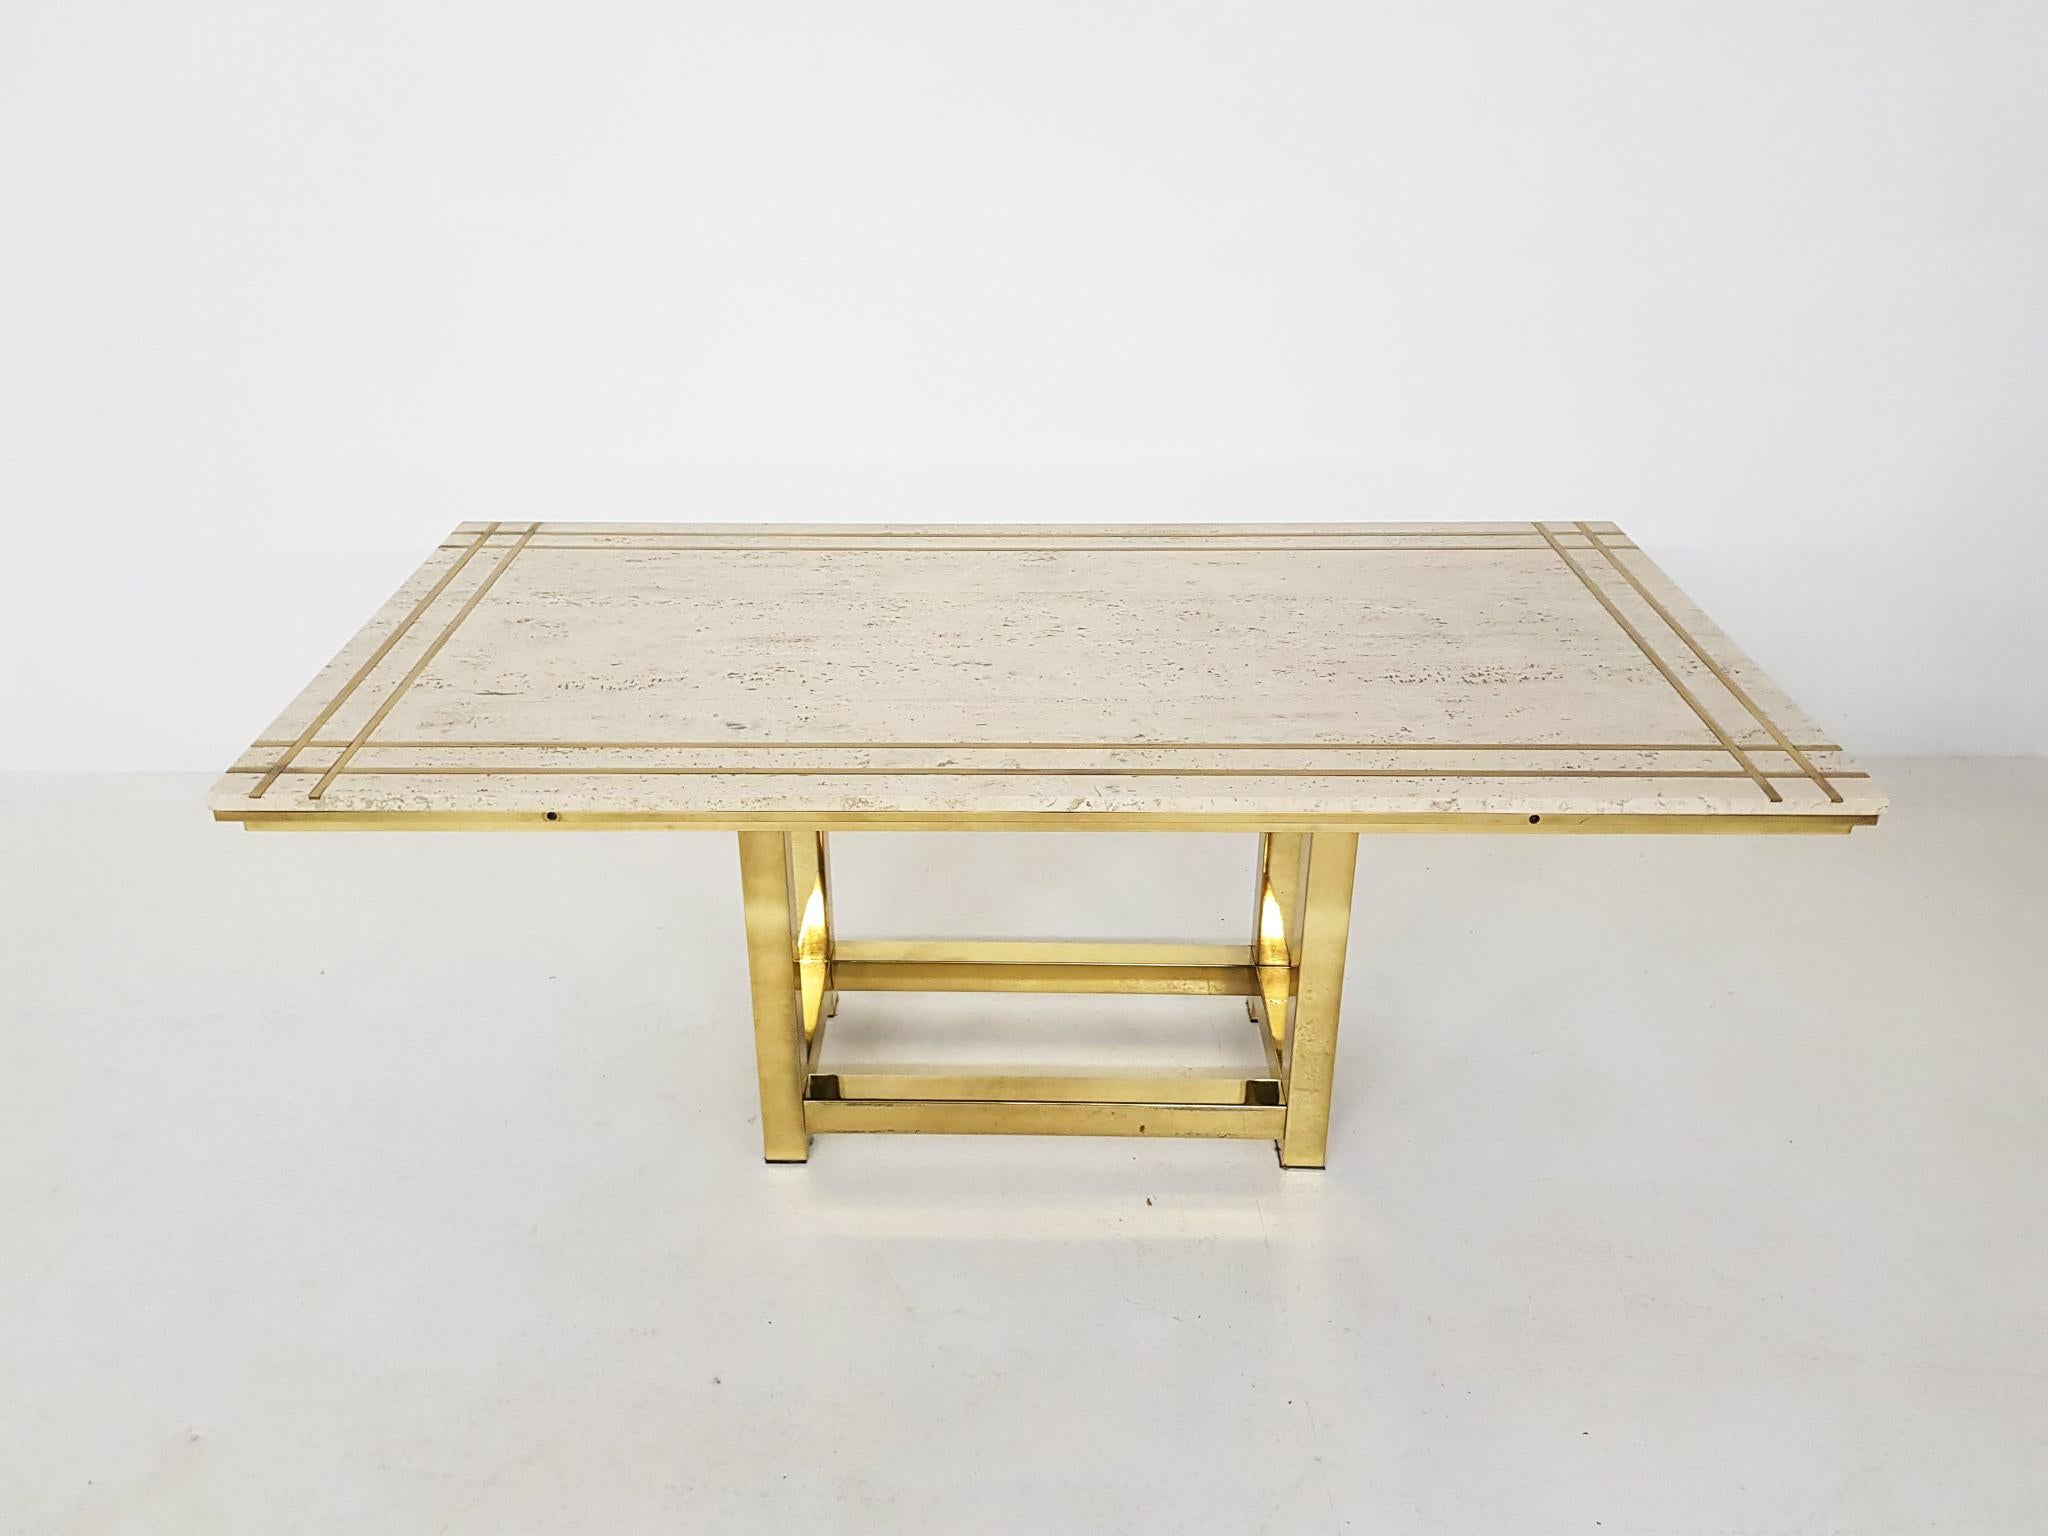 Alain Delon Travertine, Brass and Gold Dining Set, France, 1980s For Sale 2